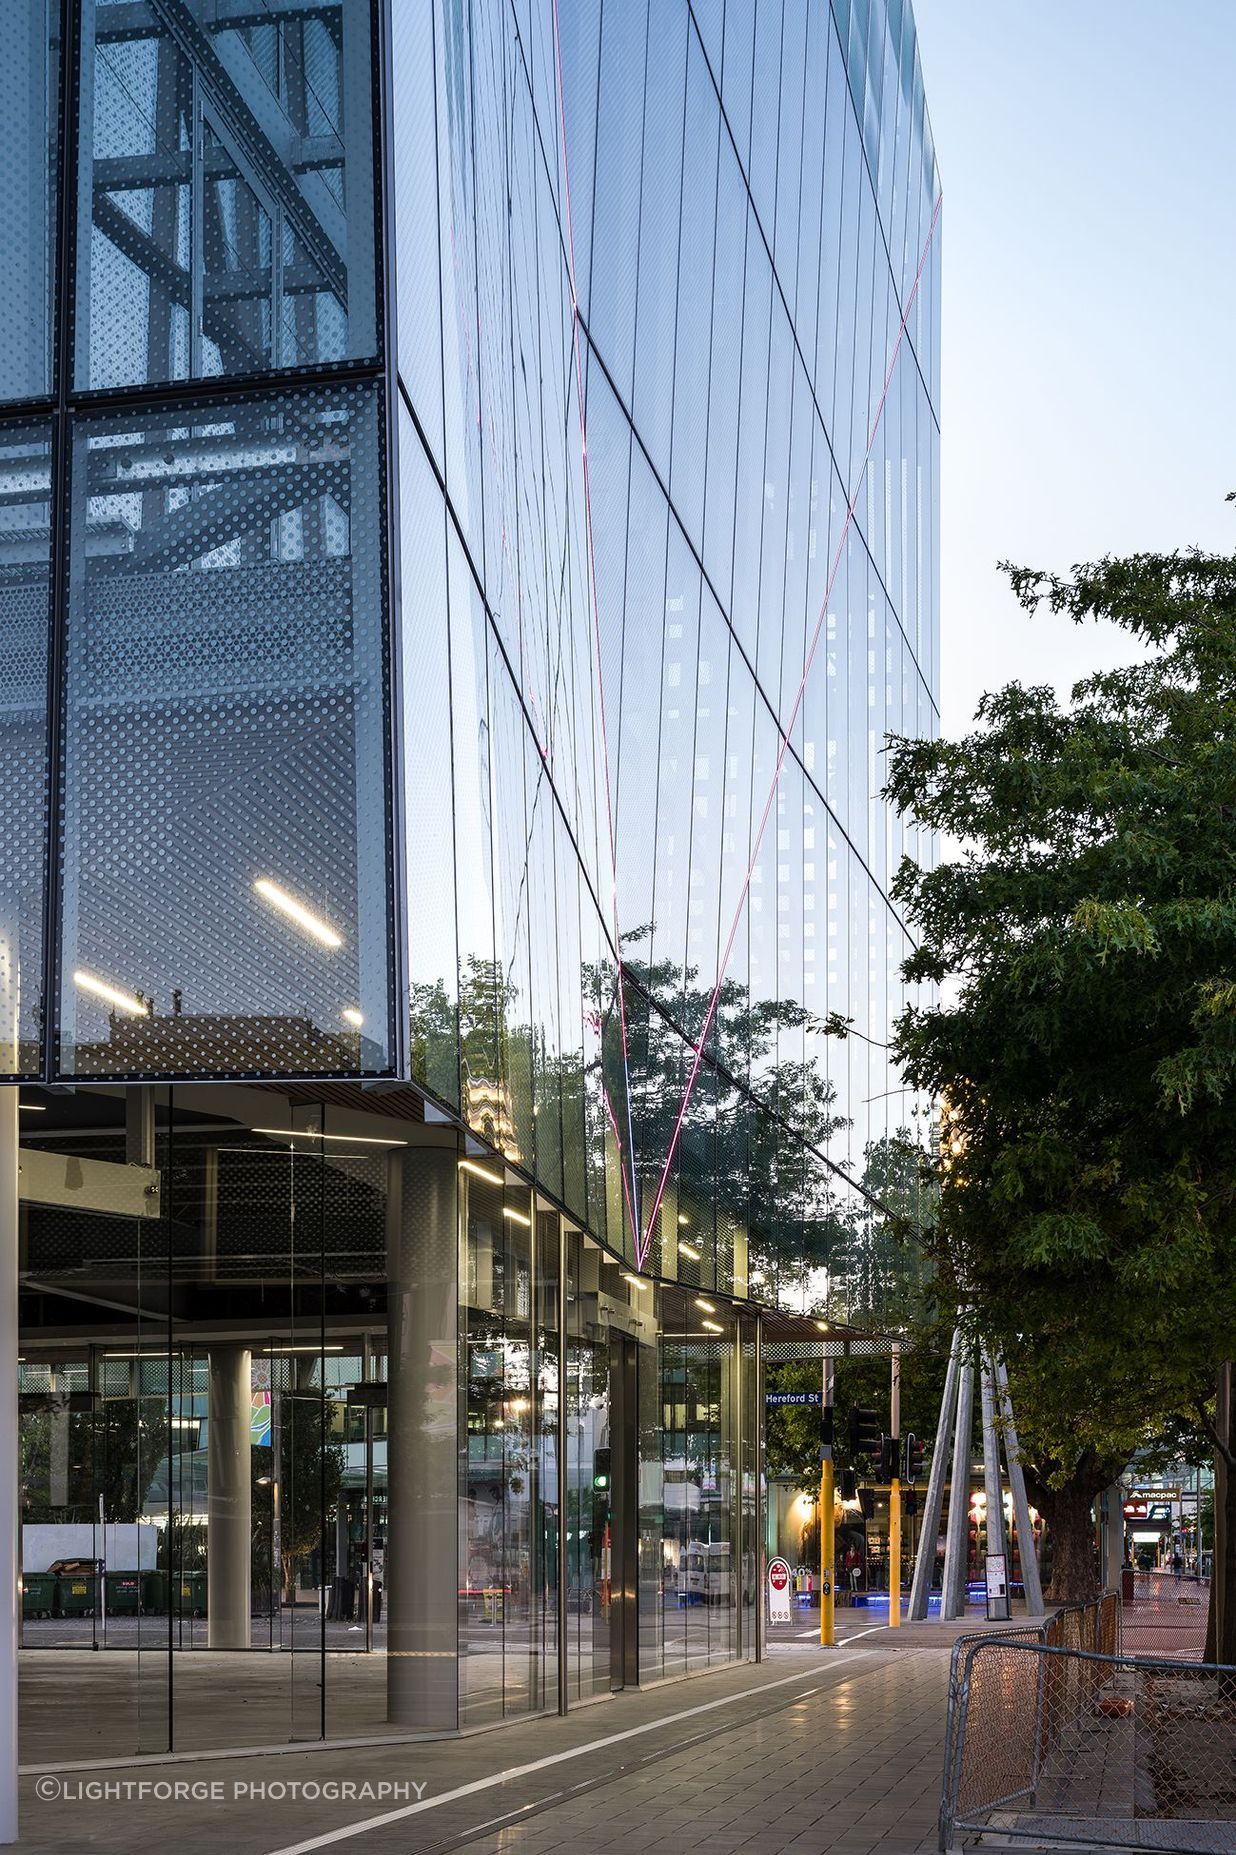  A close-up view shows the twin-skinned facade hanging like a curtain over the walkway and the fritting on the glass panels. Photograph: Dennis Radermacher/Lightforge.